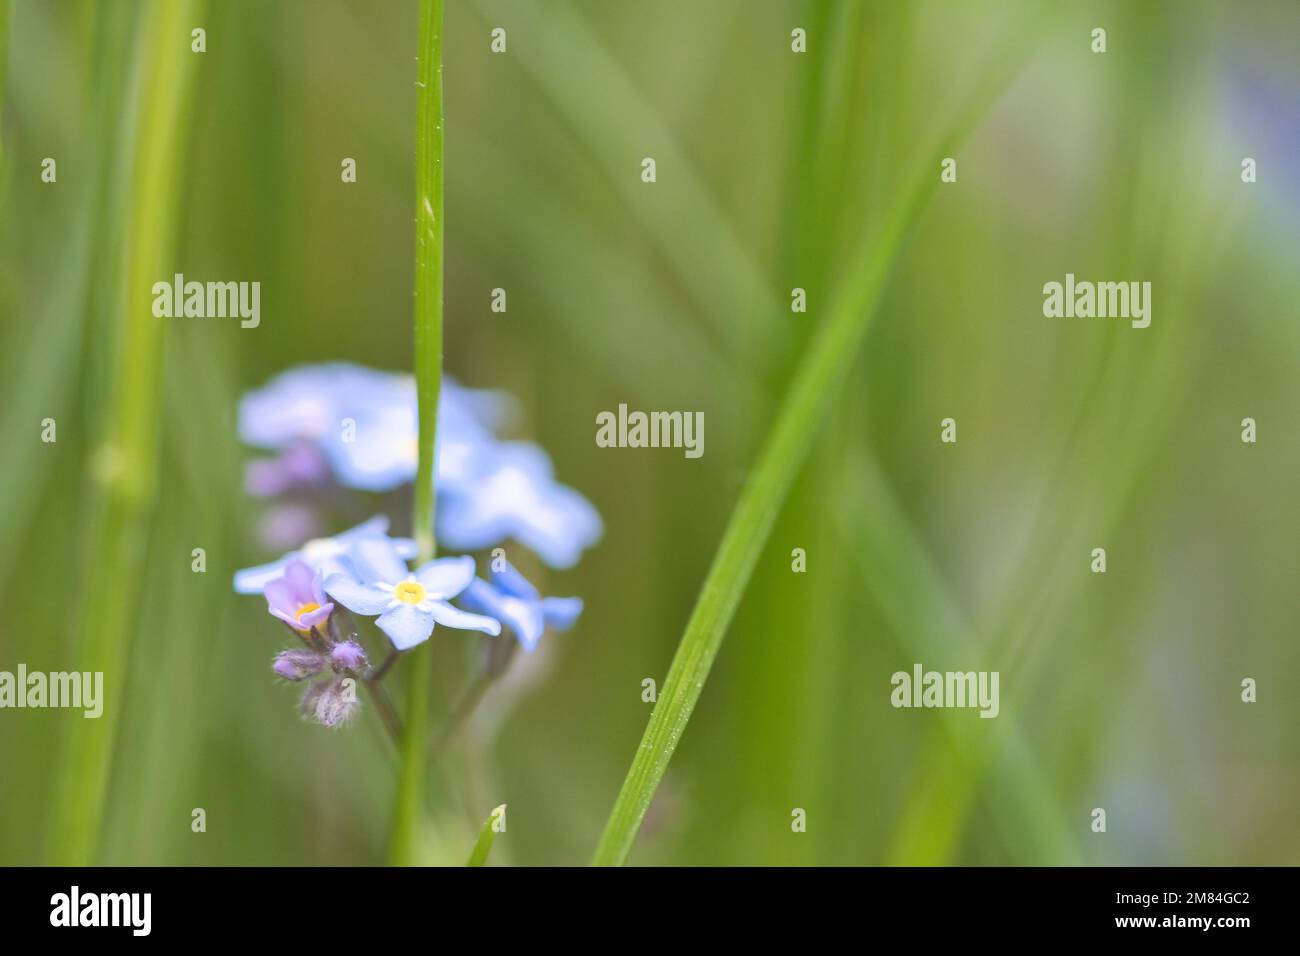 Blue petals of a flower isolated in green grass shown. Natural meadow with flowers. Landscape shot from nature Stock Photo